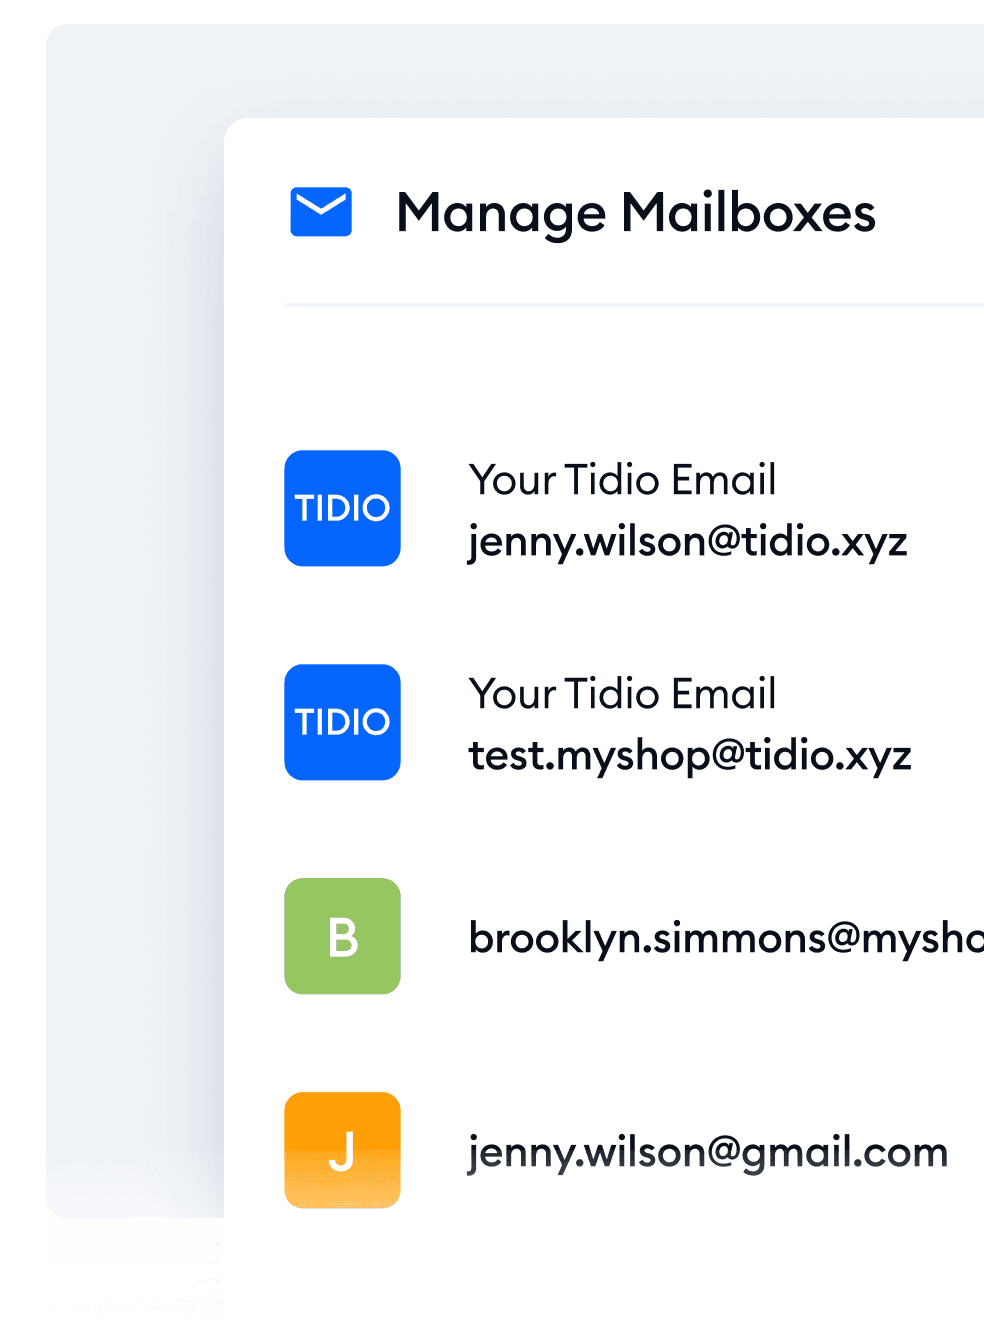 Tool for managing mailboxes